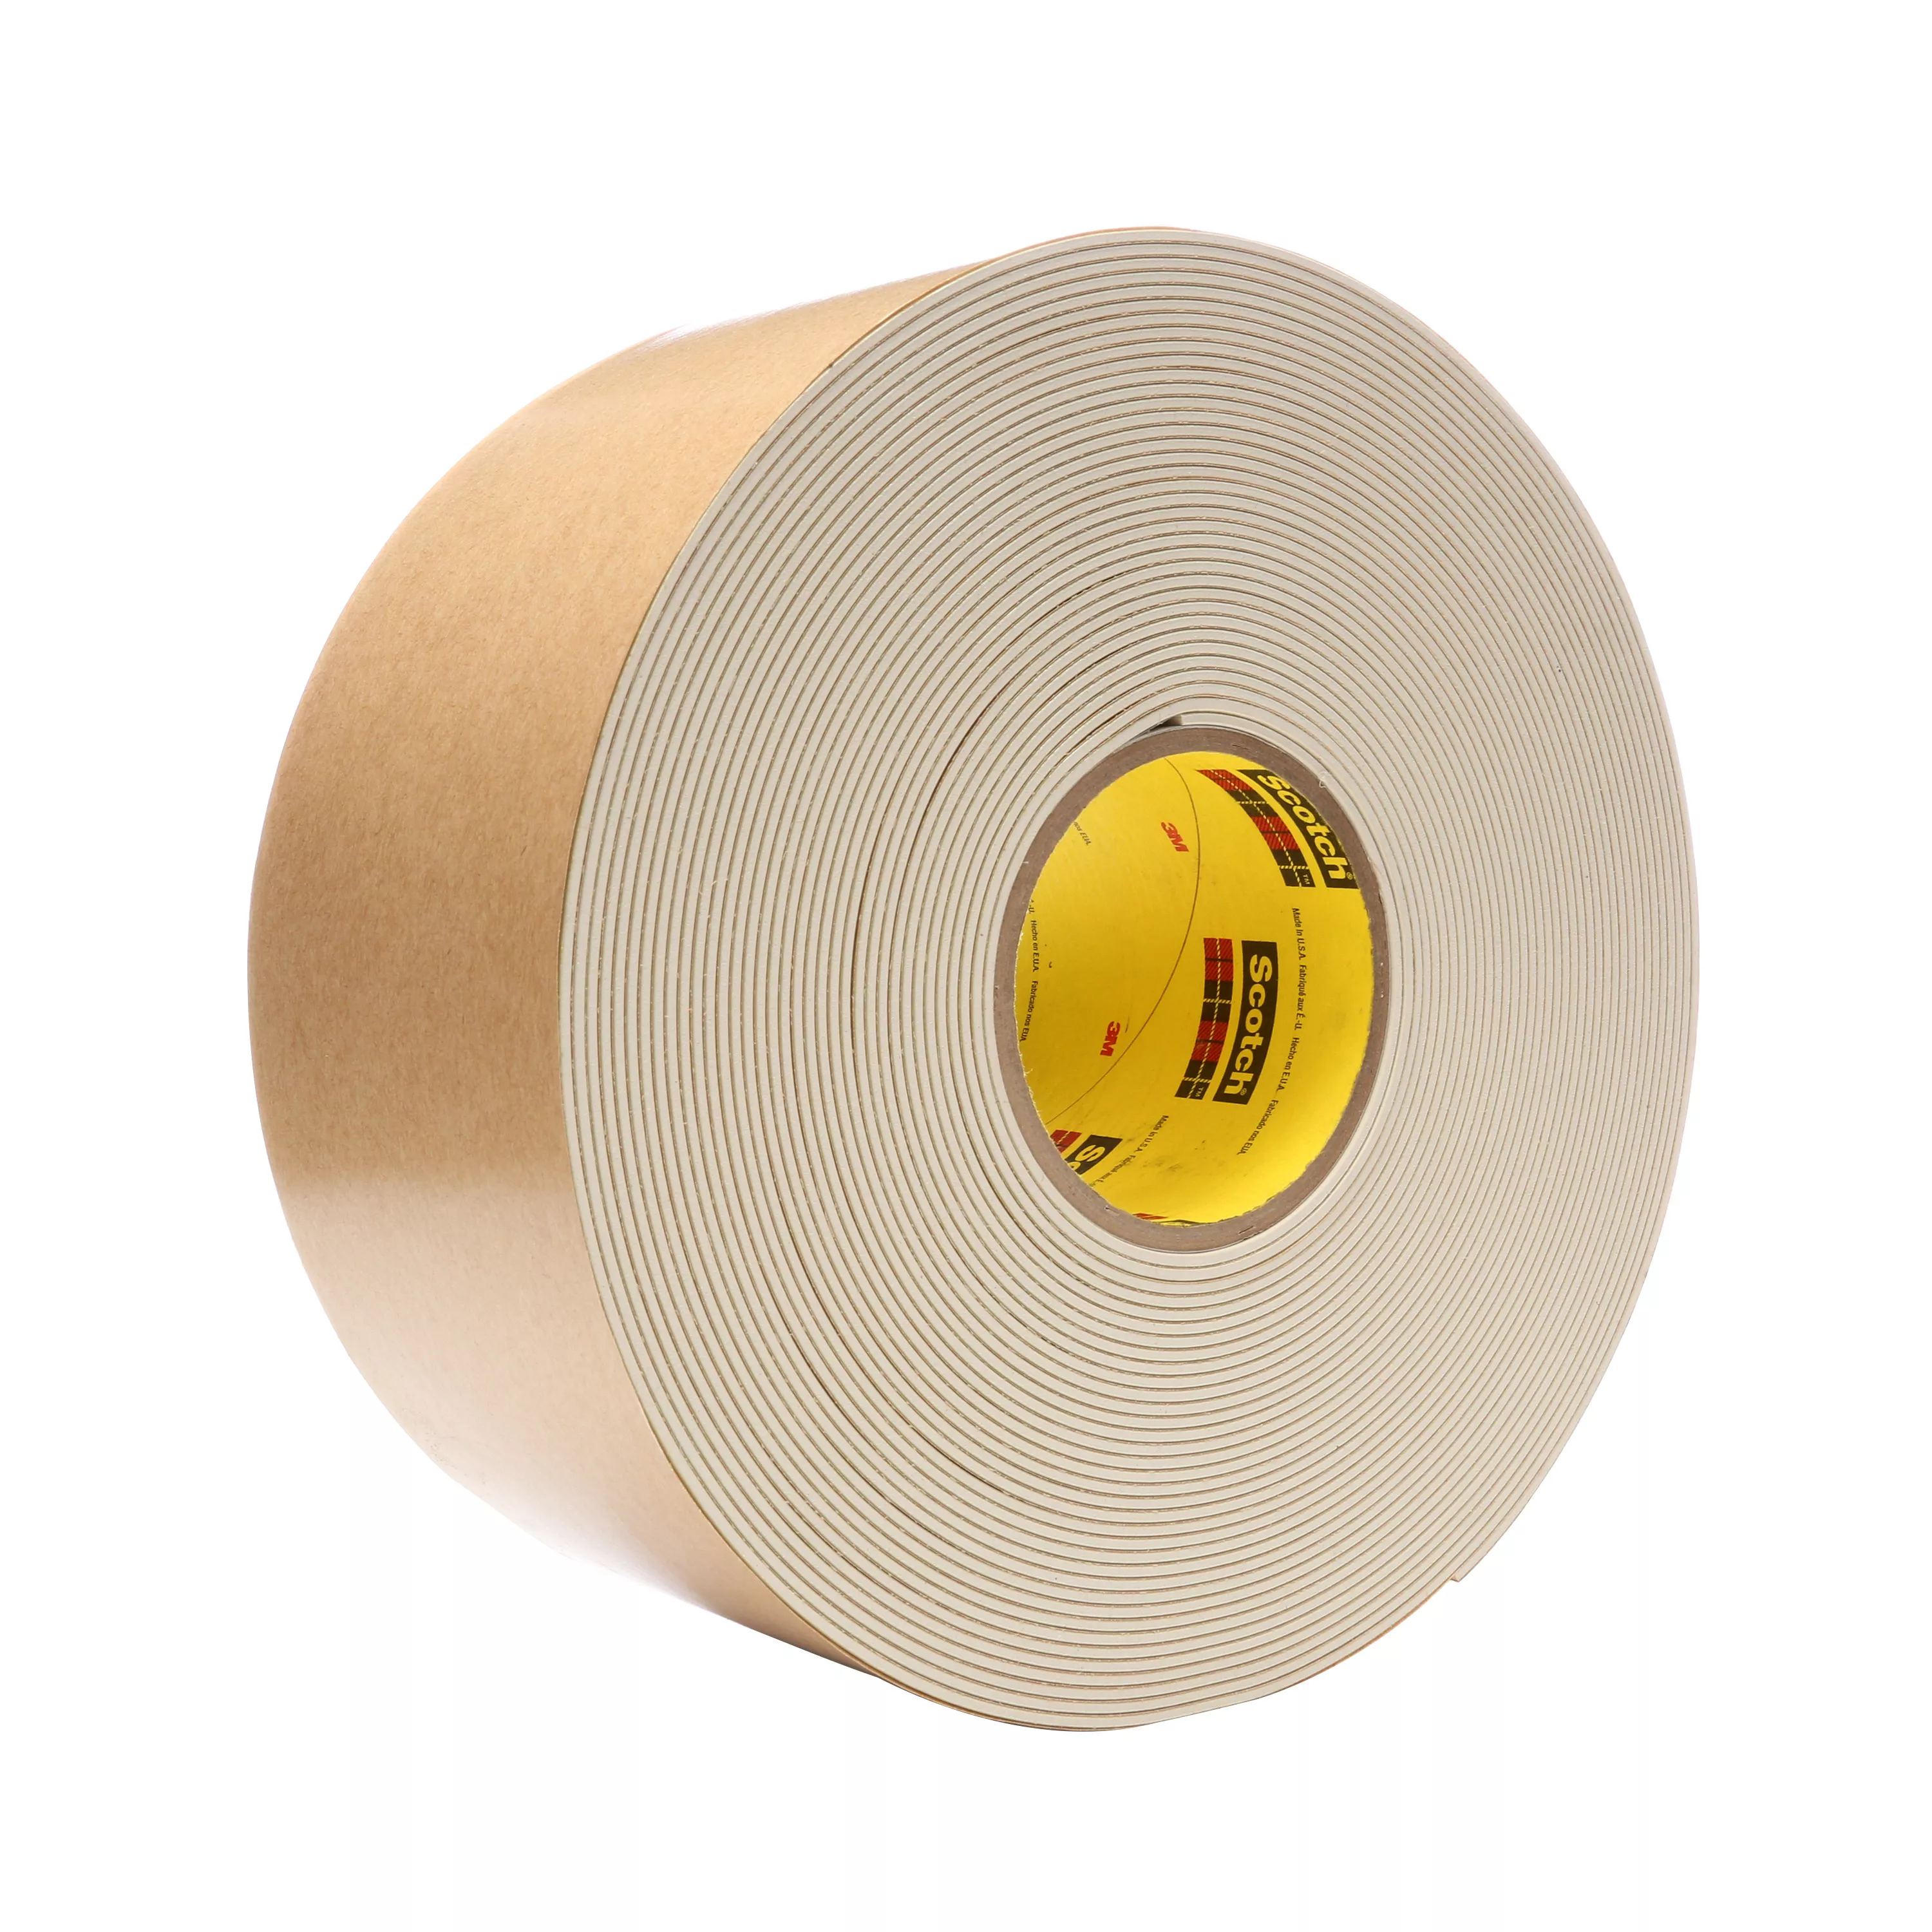 3M™ Impact Stripping Tape 528, Tan, 6 in x 20 yd, 82 mil, 2 Roll/Case